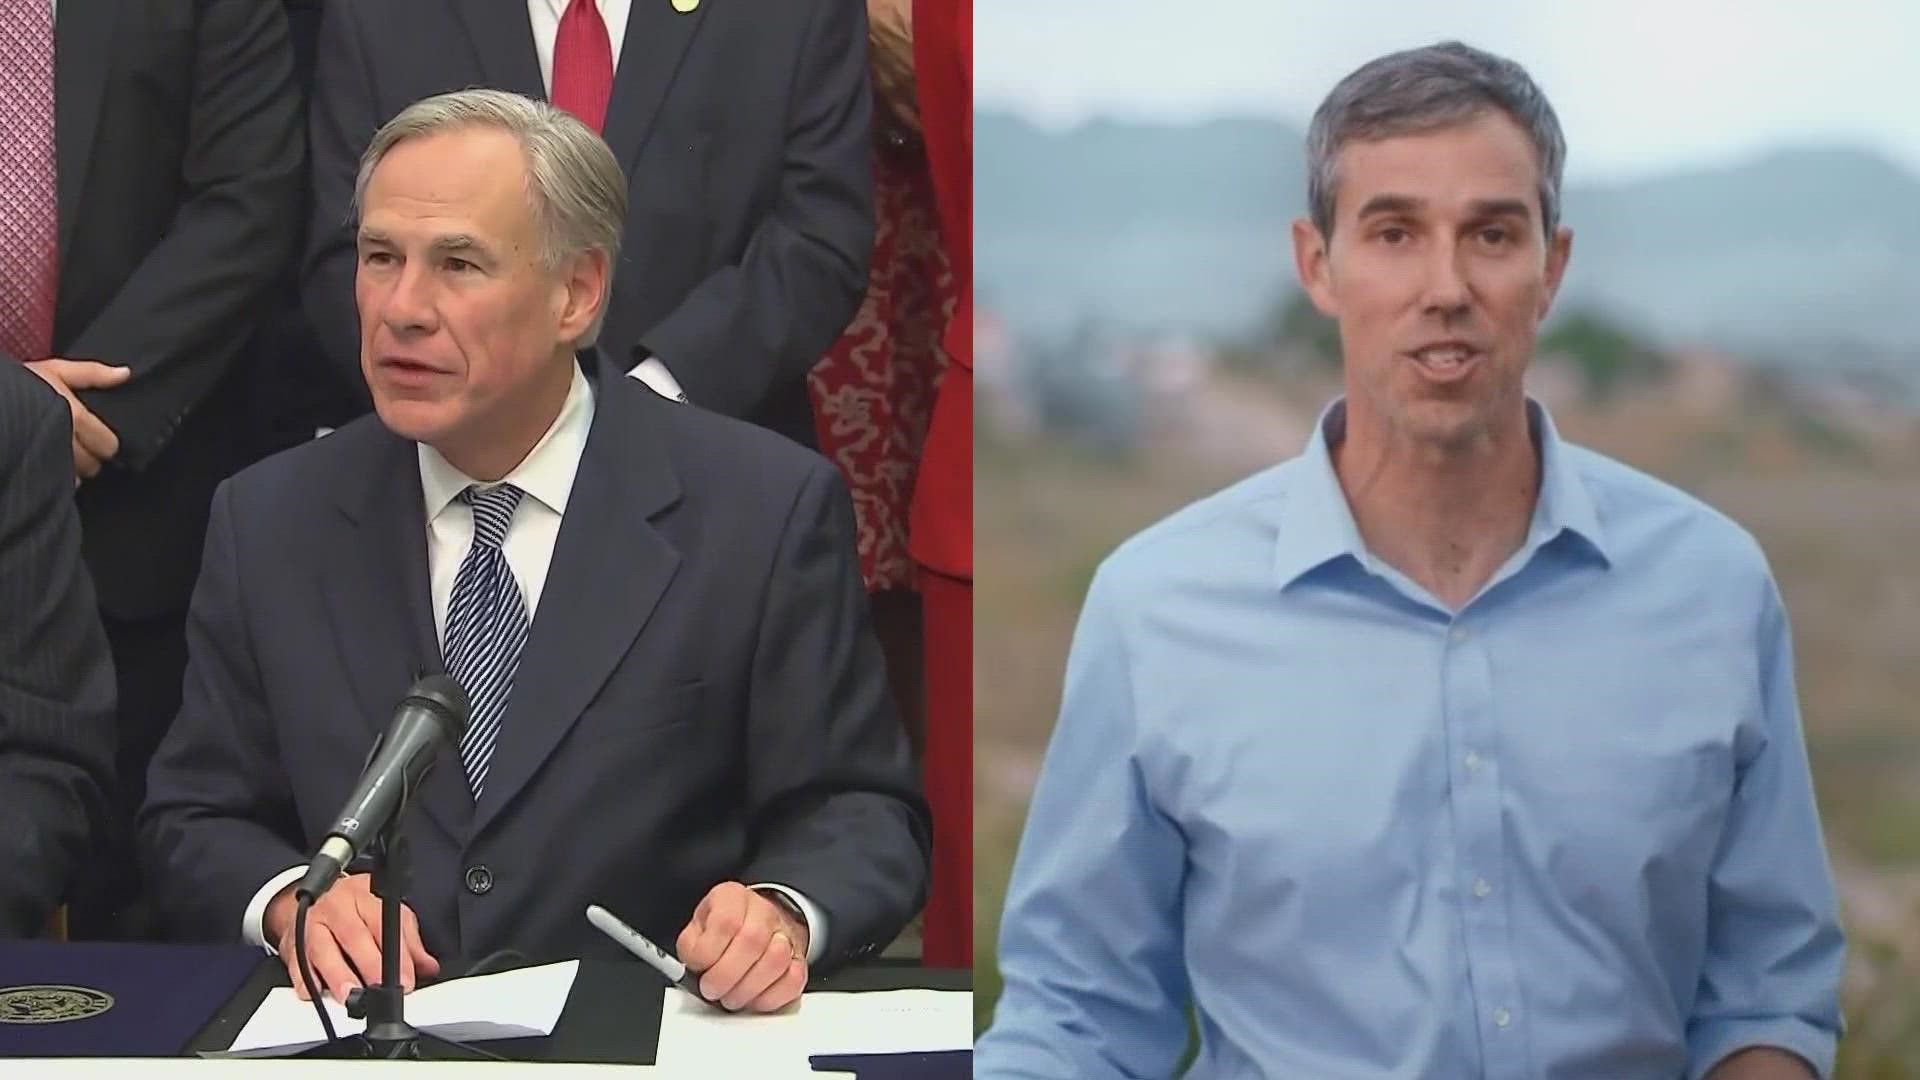 A recent poll from the University of Houston showed a 13% gap between Beto O'Rourke and Greg Abbott, although other polls have a smaller difference.